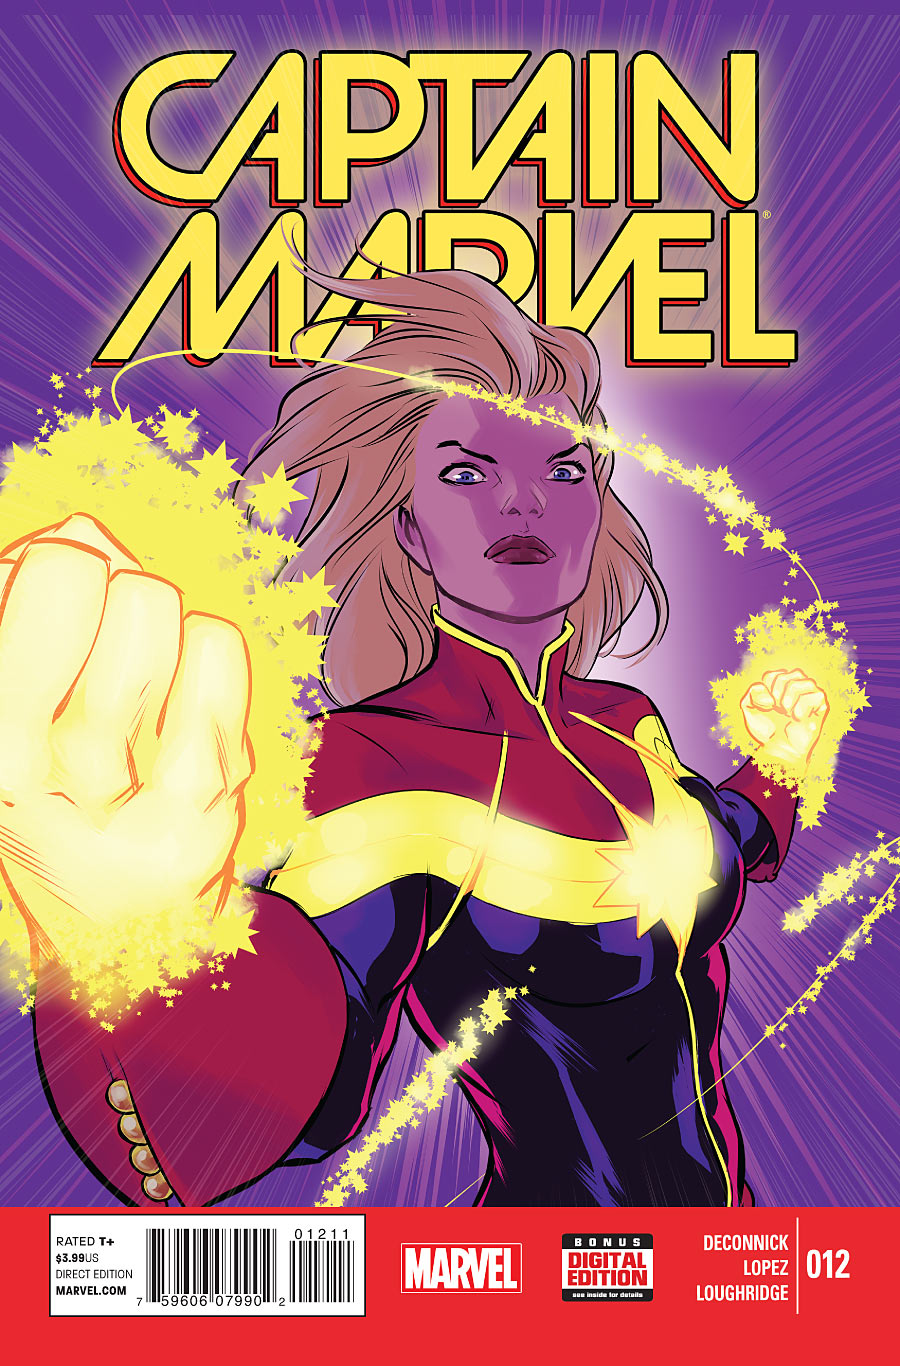 Preview Captain Marvel 12 All